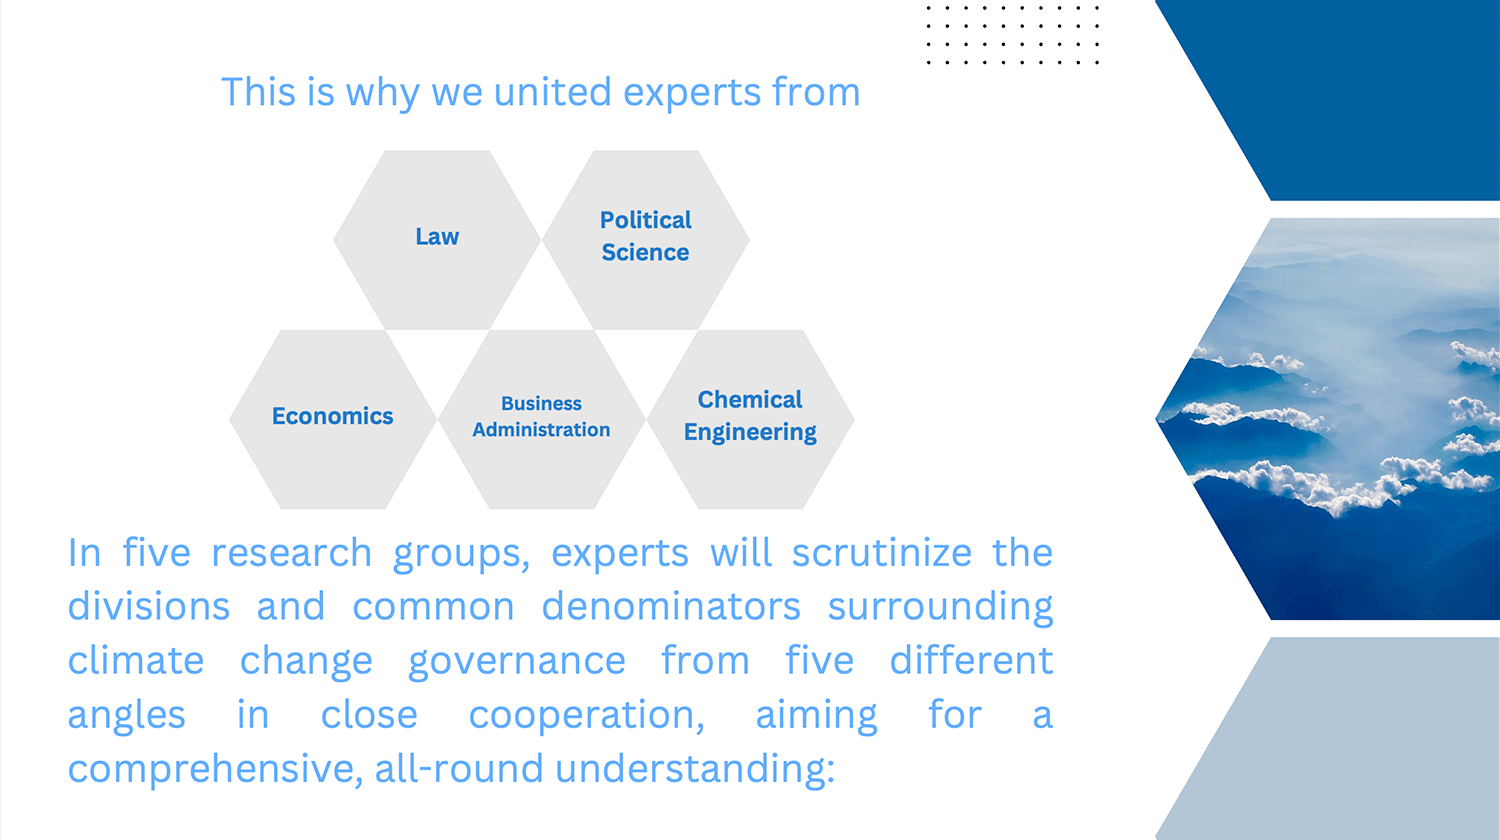 This is why we united experts from…